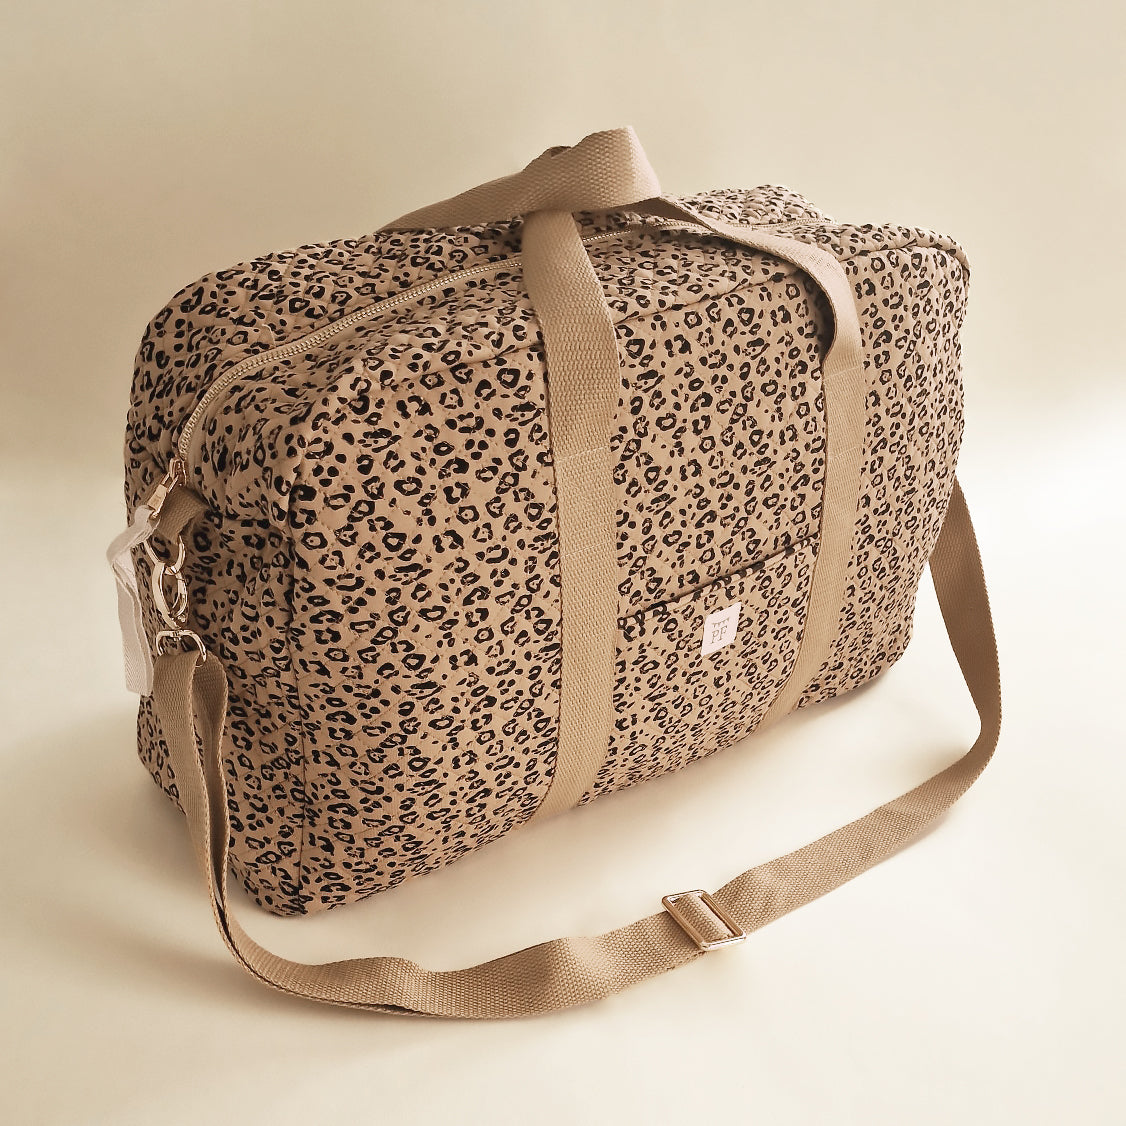 Quilted Mommy Bag - Leopard - Petit Filippe